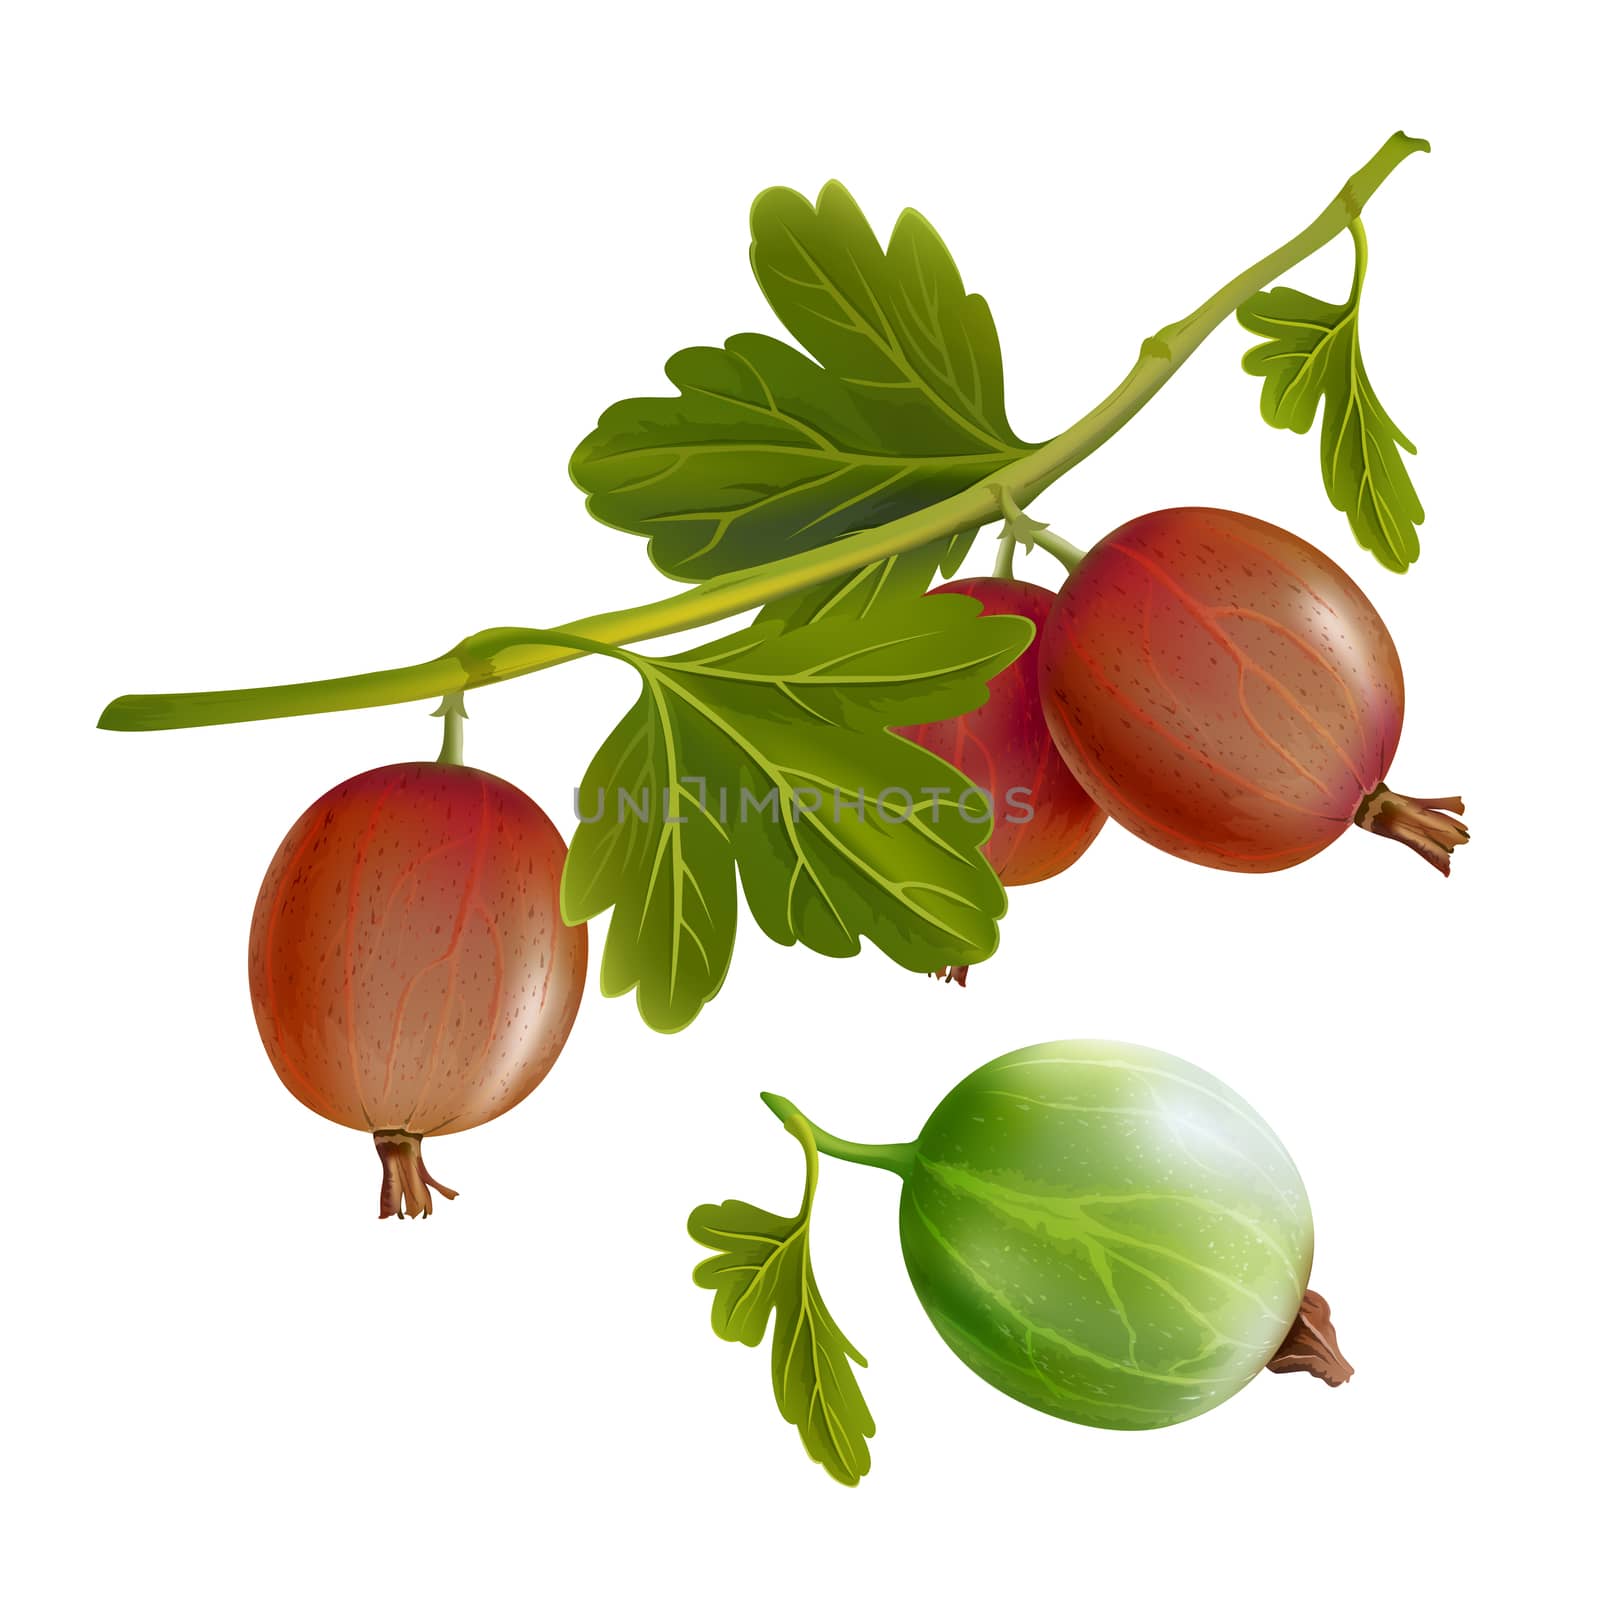 Gooseberries with leaves. Isolated illustration on white background.